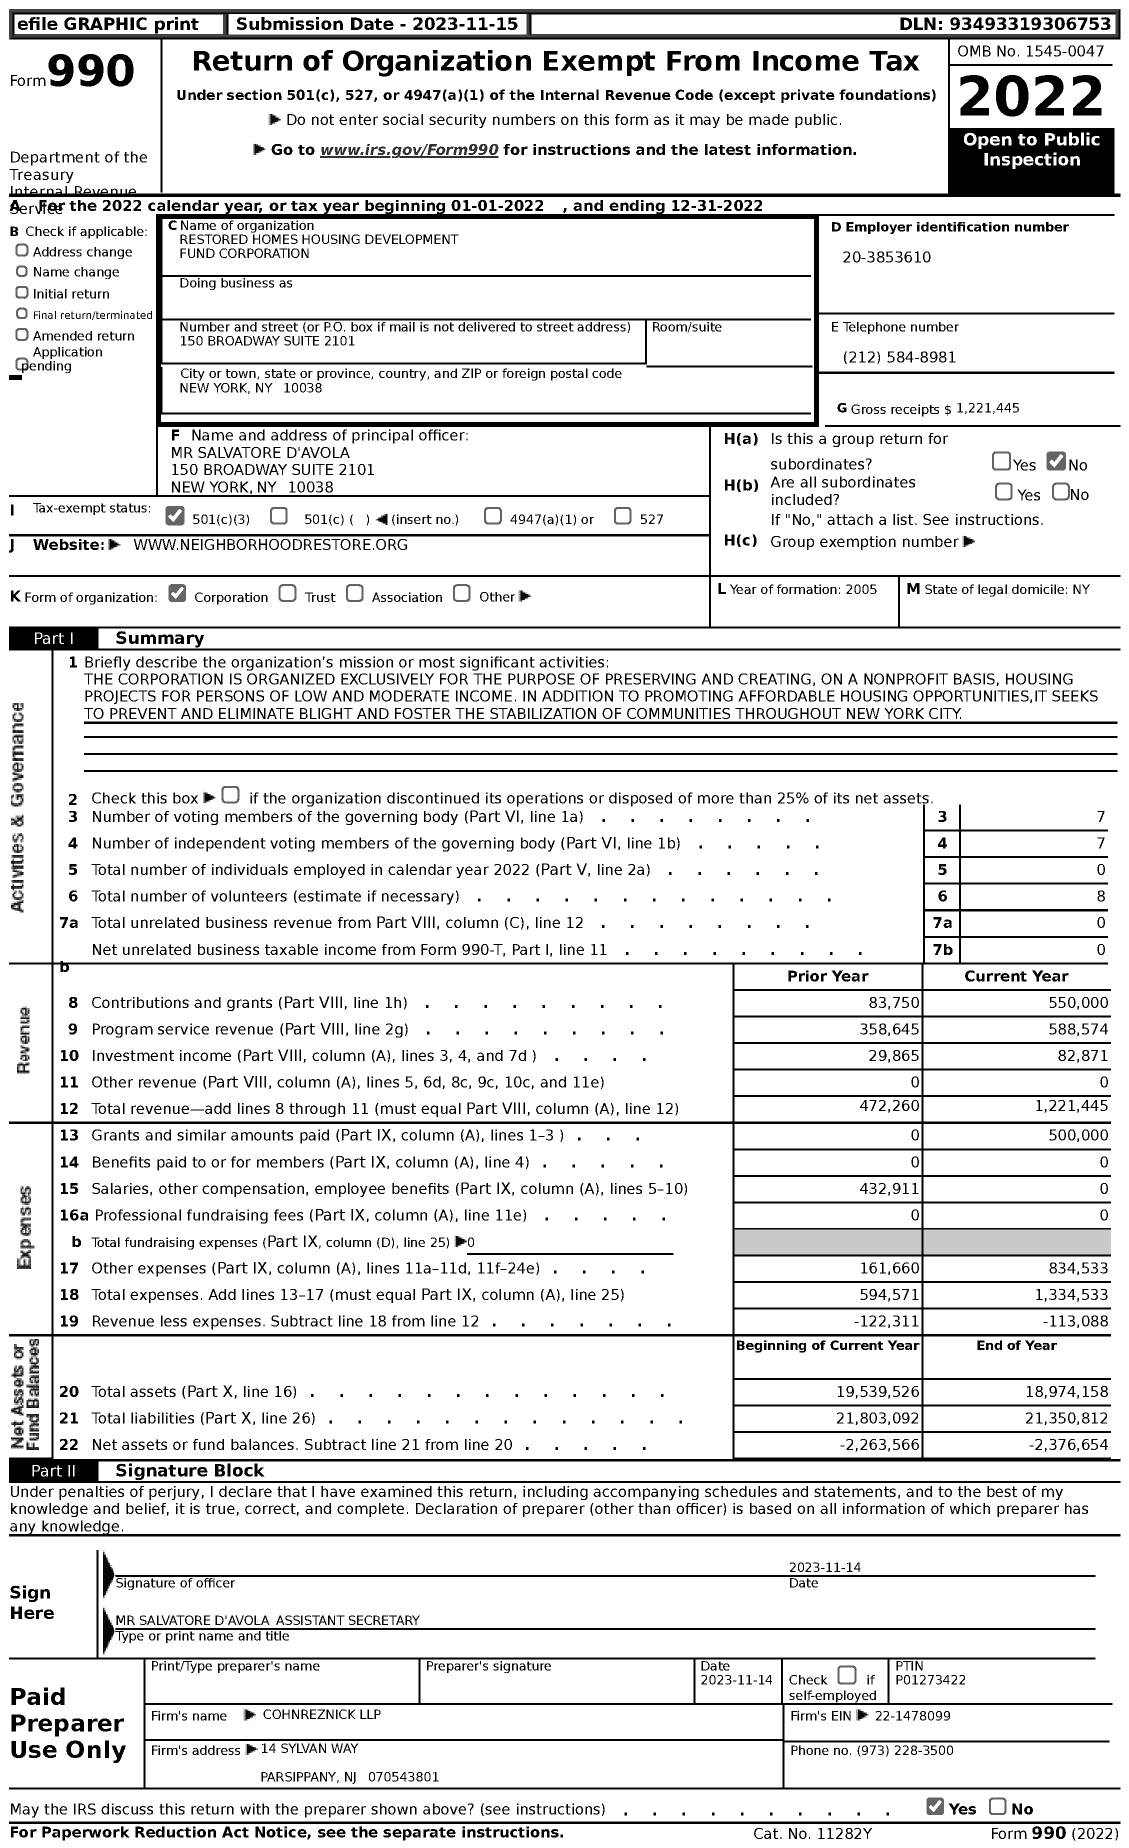 Image of first page of 2022 Form 990 for Restored Homes Housing Development Fund Corporation